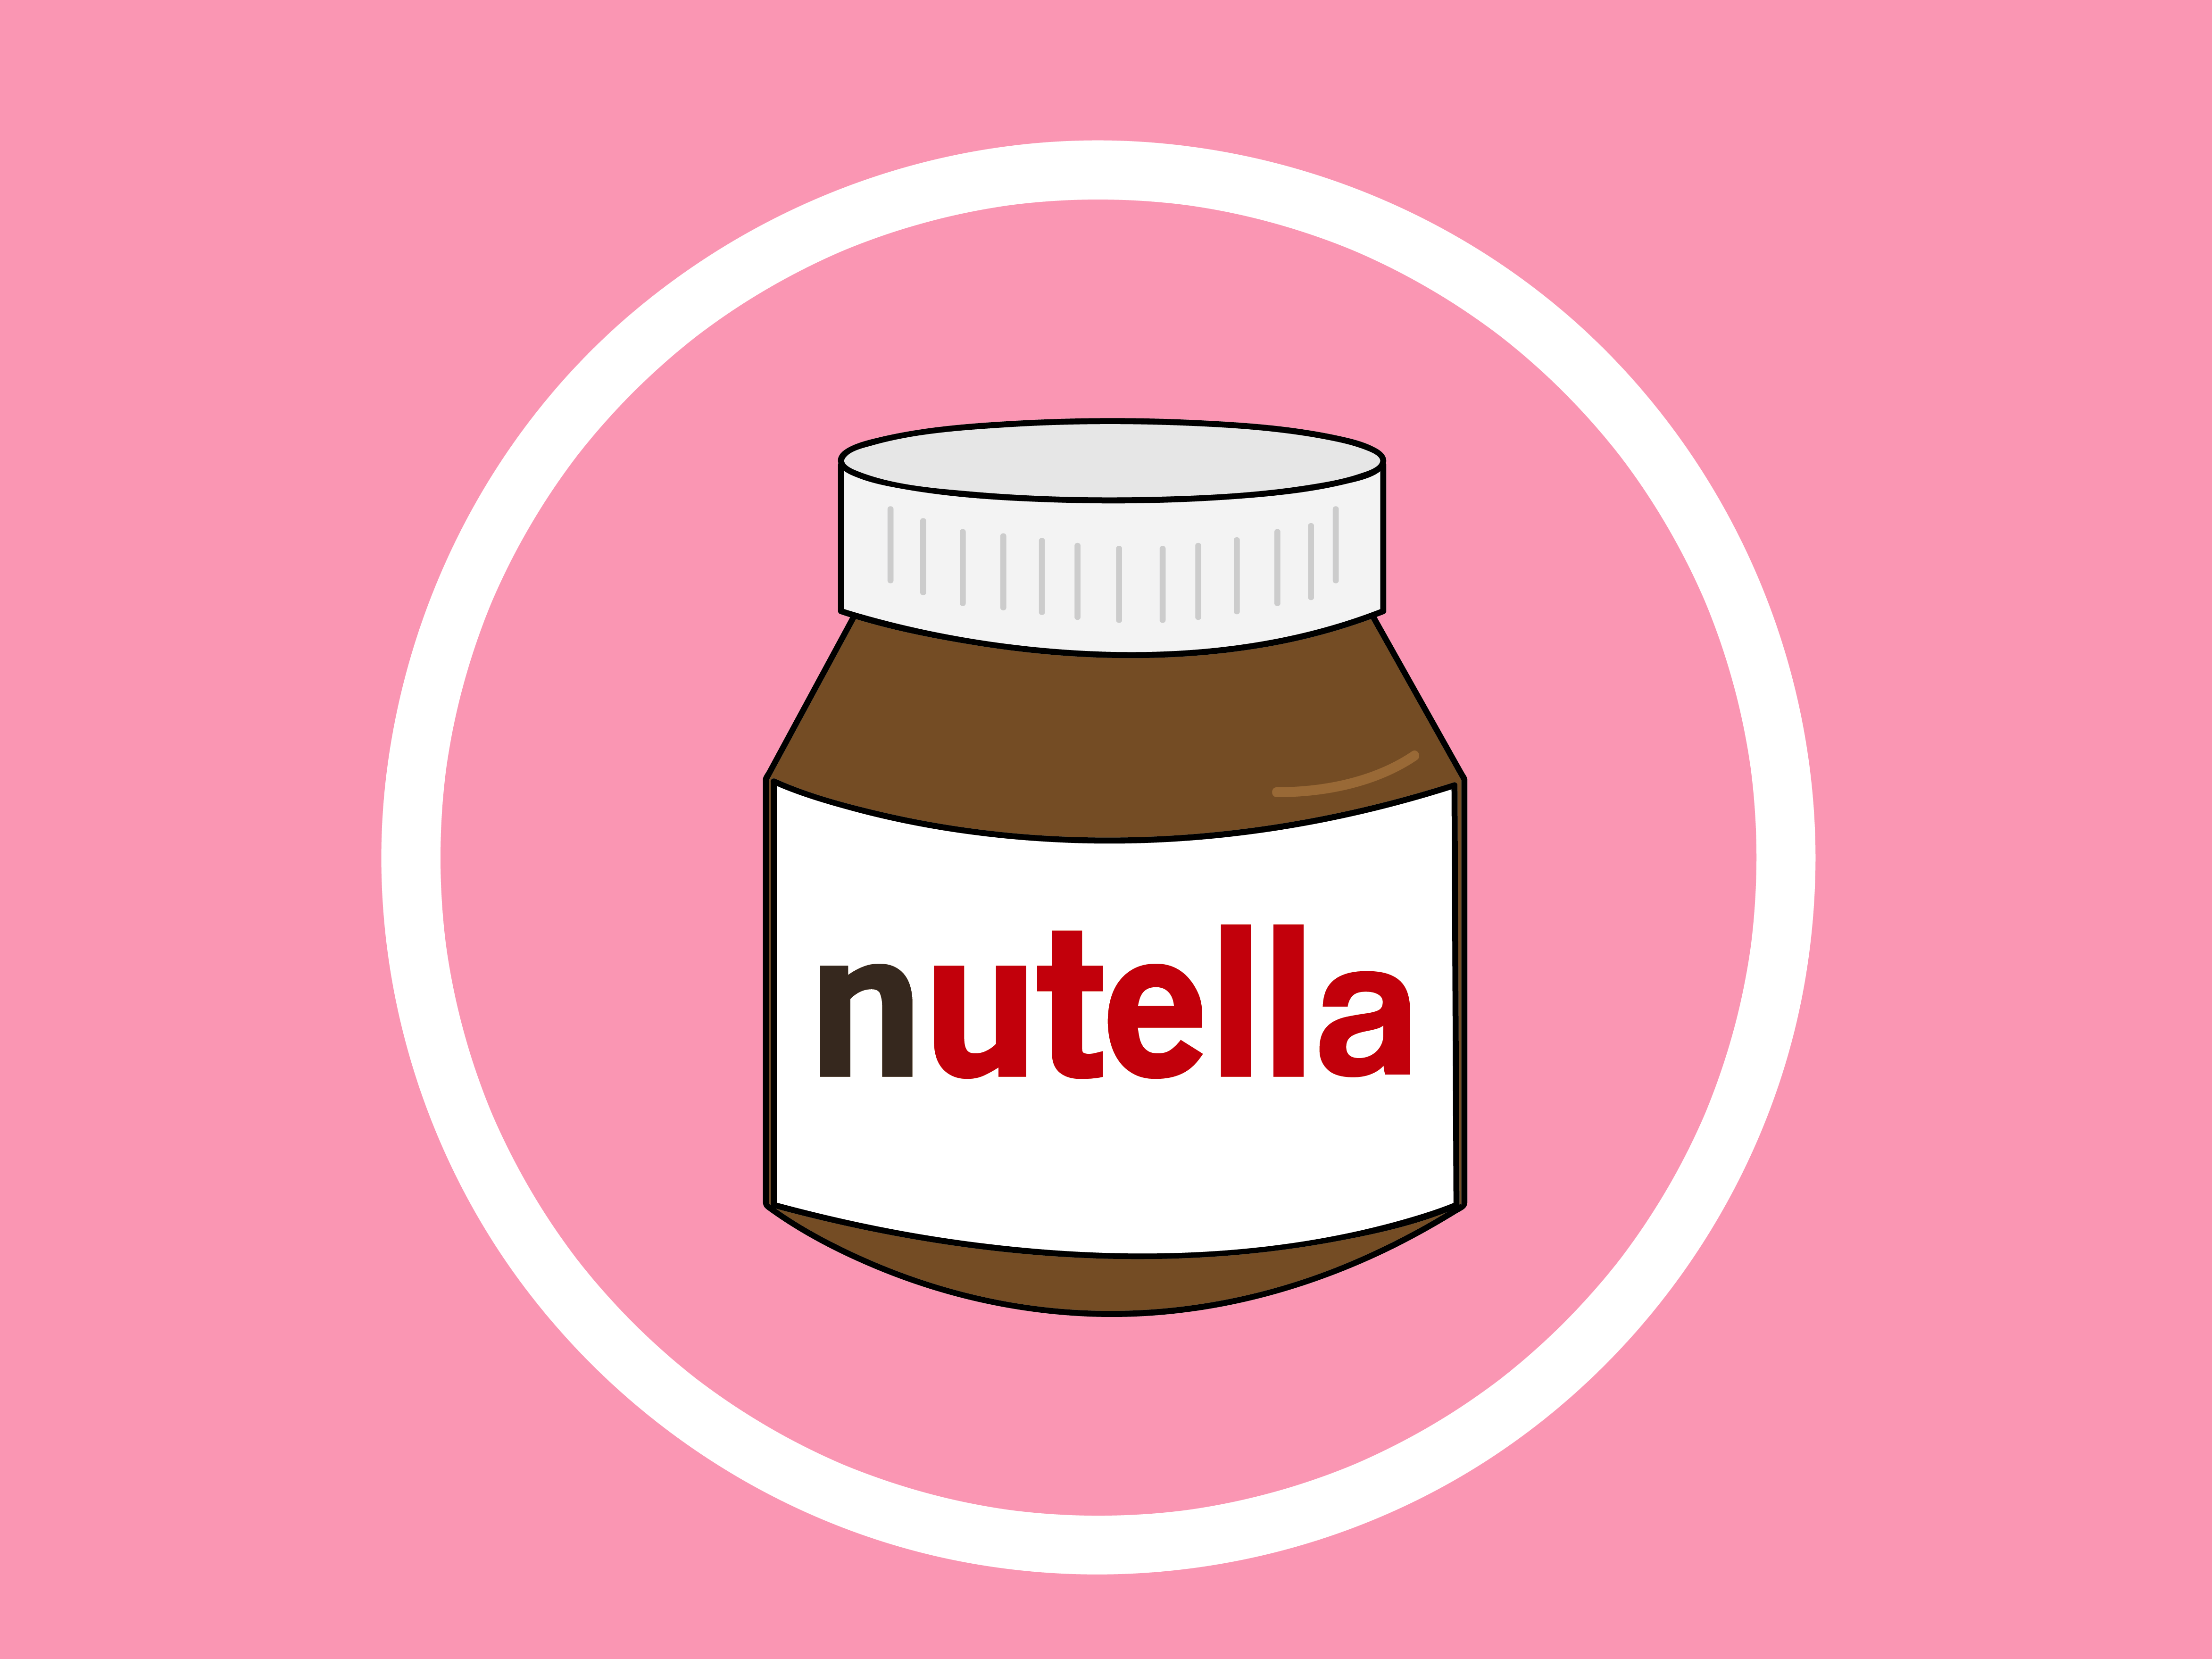 Ideasinhat | What Nutella Says About Us